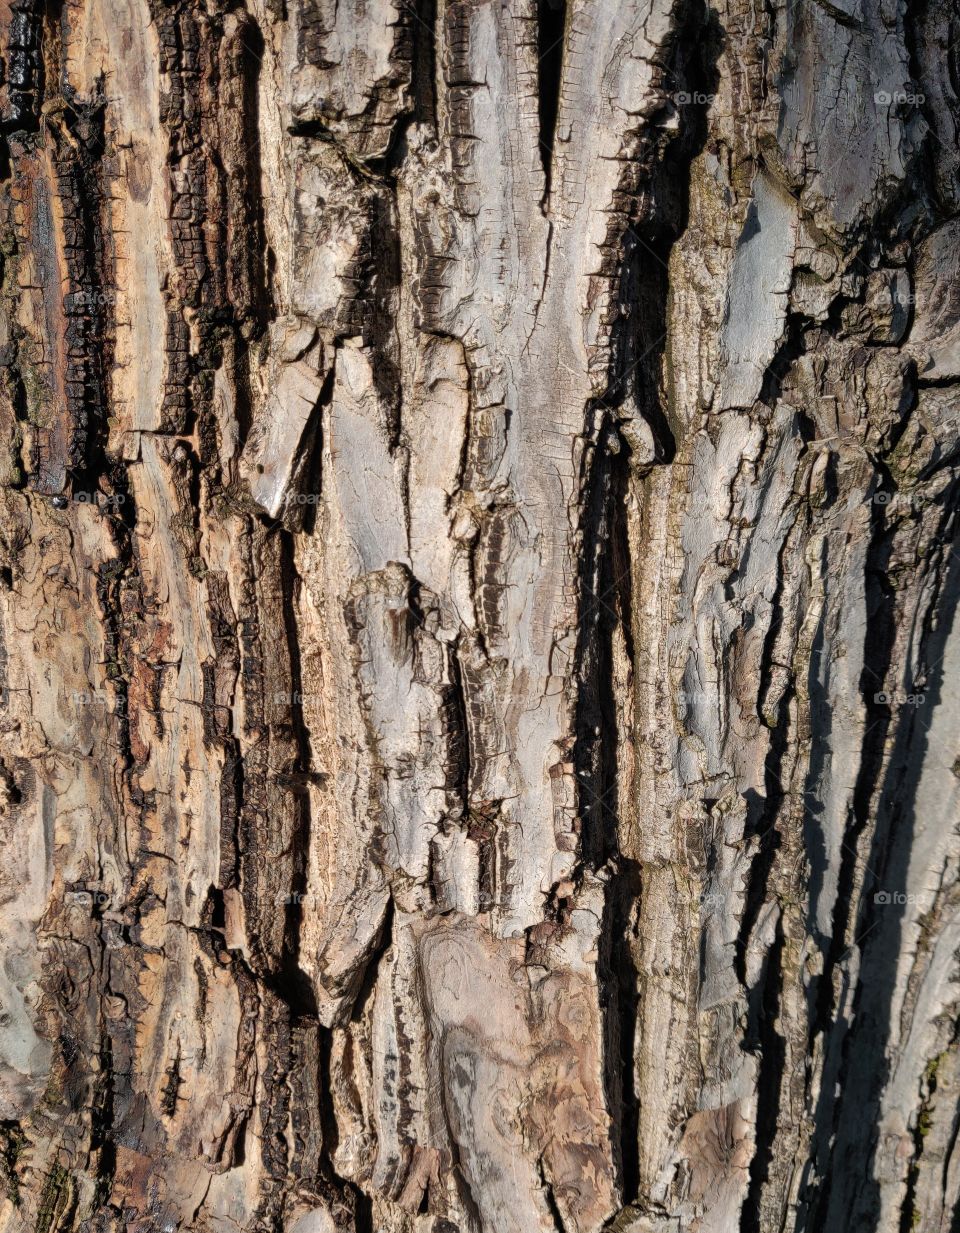 Textures from tree bark